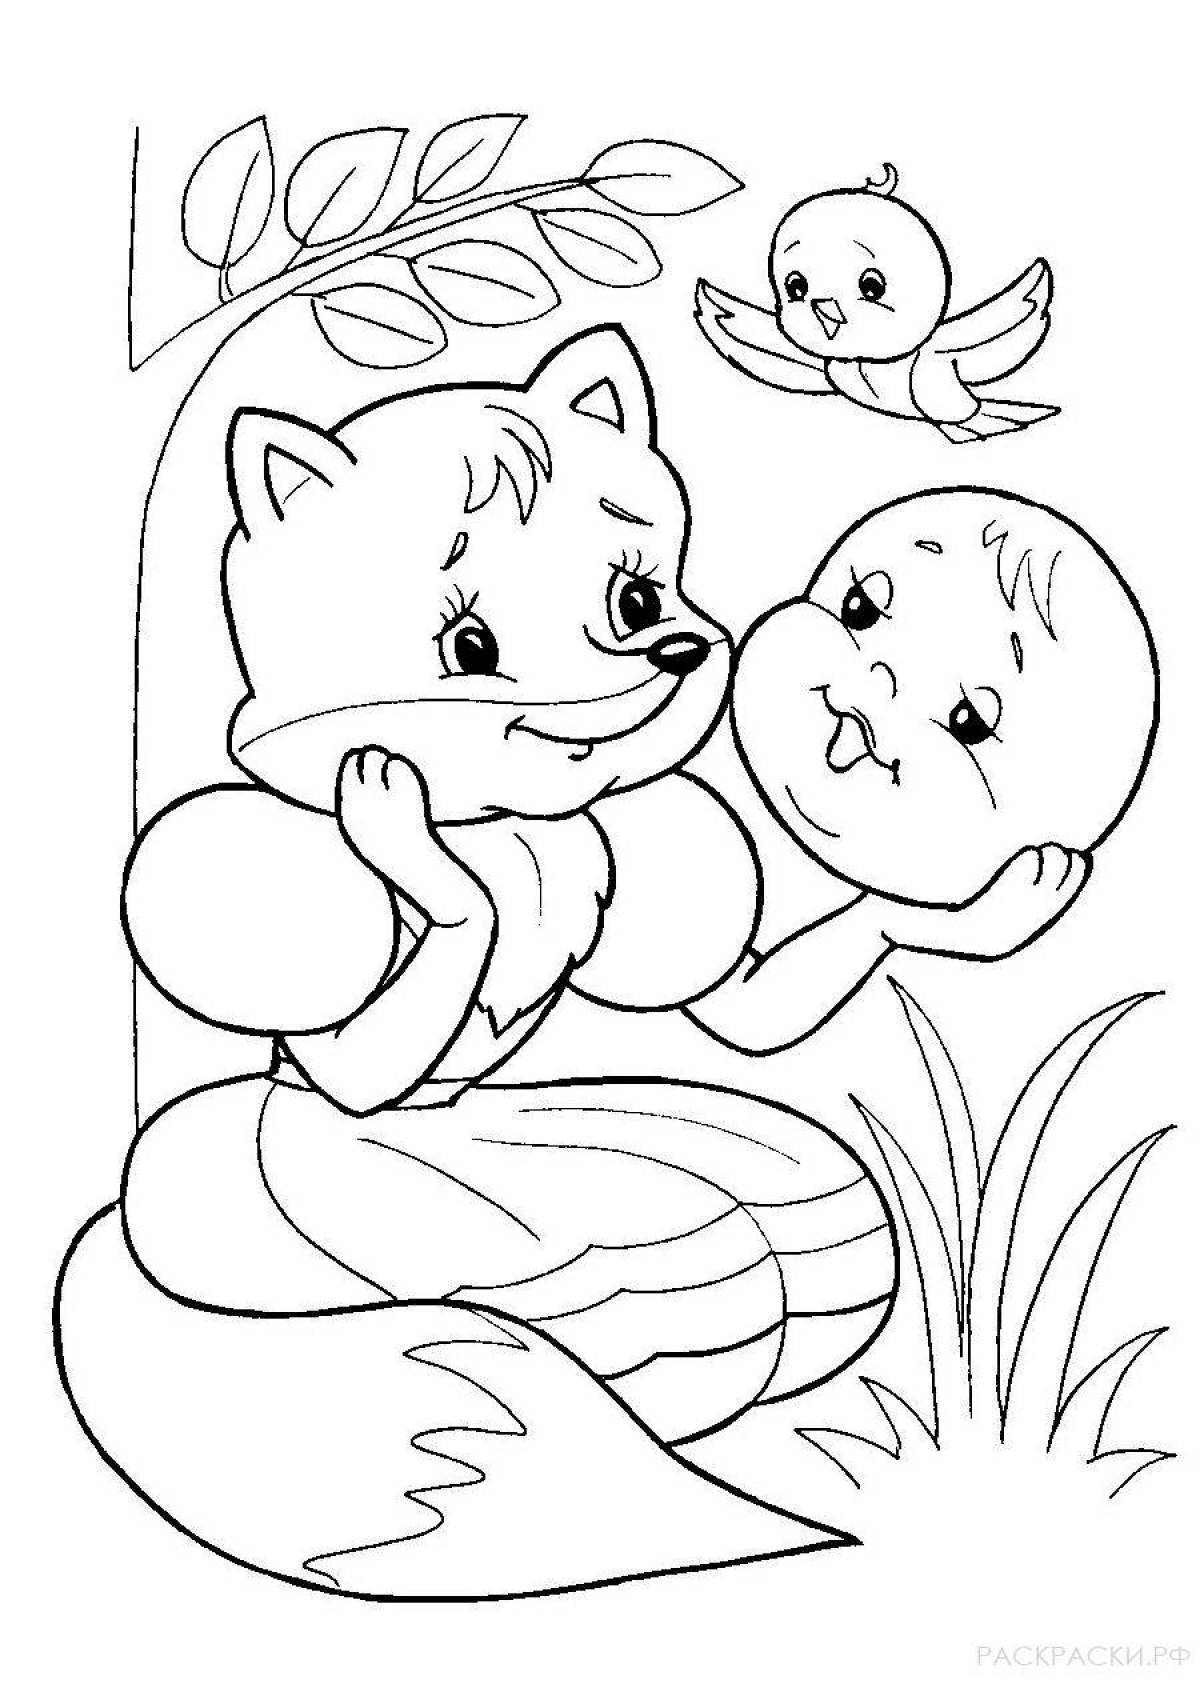 Fancy coloring for children 3-4 years old Russian folk tales